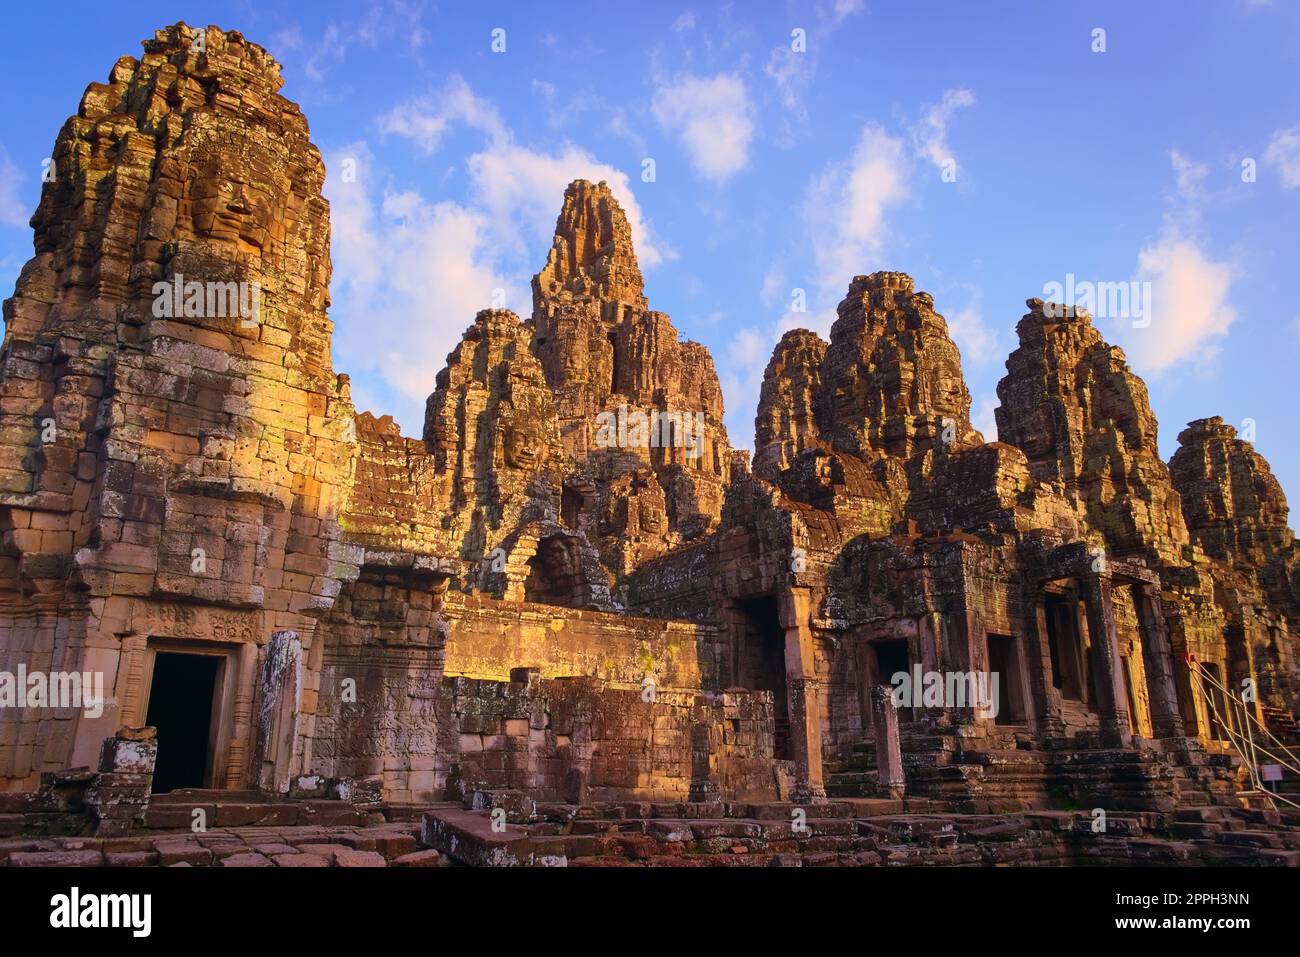 Bayon temple, located in Angkor, Cambodia, the ancient capital city of the Khmer empire. View of the massive stone face towers from the western inner courtyard. Stock Photo